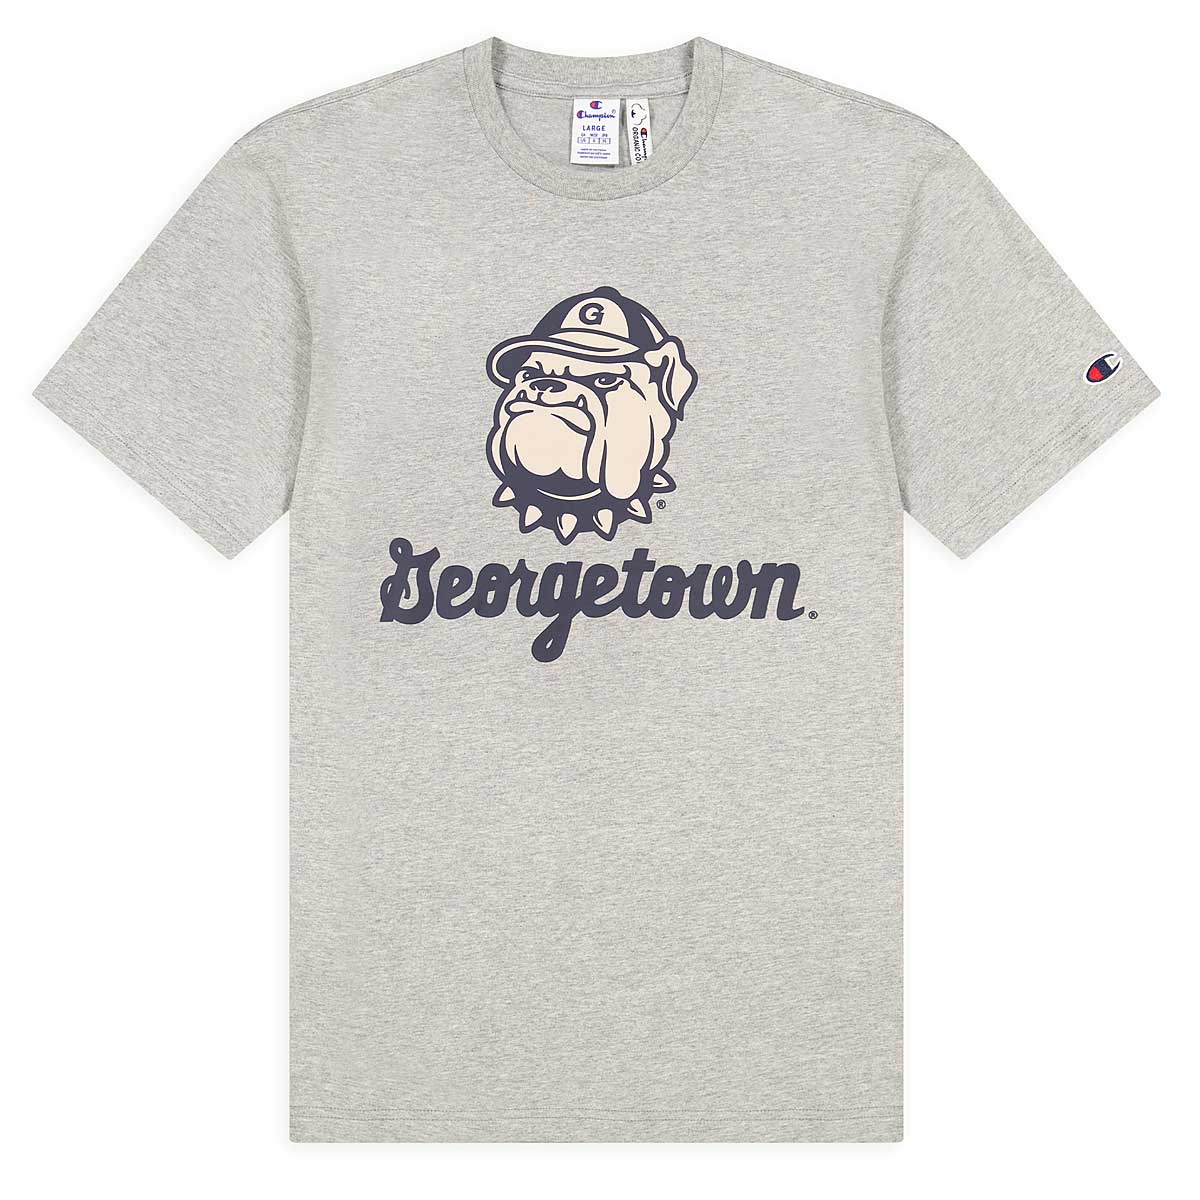 Champion Georgetown T-Shirt, New Oxford Grey Melange Top Dyed